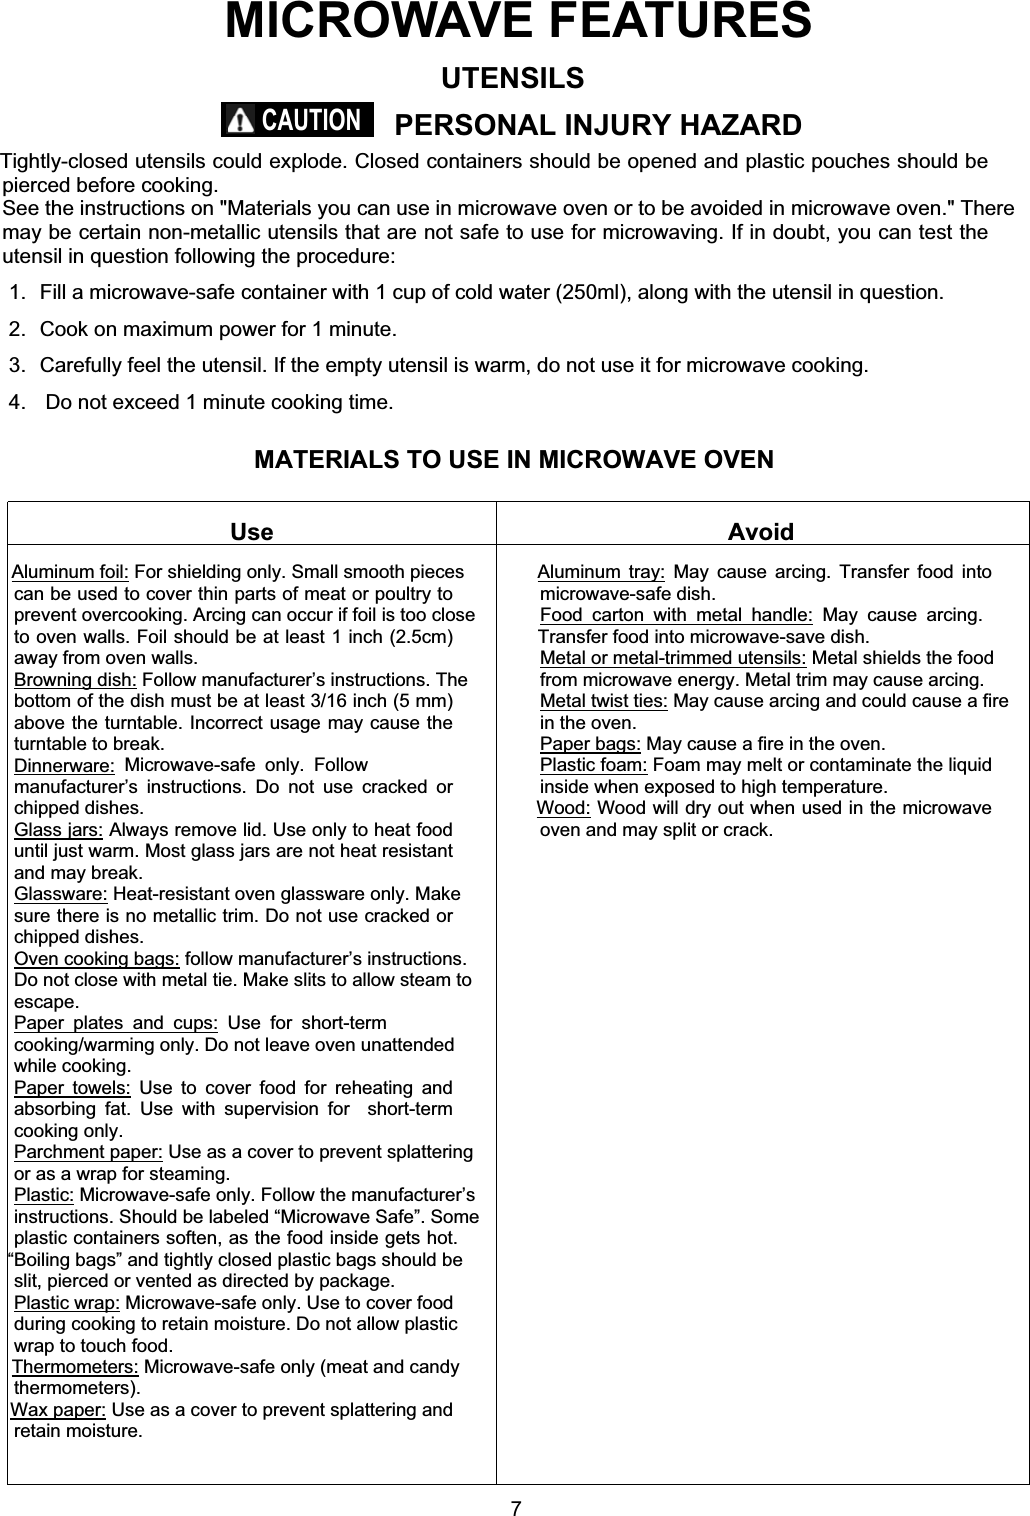 MATERIALS TO USE IN MICROWAVE OVENMICROWAVE FEATURESUse AvoidAluminum foil: For shielding only. Small smooth piecescan be used to cover thin parts of meat or poultry toprevent overcooking. Arcing can occur if foil is too closeto oven walls. Foil should be at least 1 inch (2.5cm)away from oven walls.Browning dish: Follow manufacturer’s instructions. Thebottom of the dish must be at least 3/16 inch (5 mm)above the turntable. Incorrect usage may cause theturntable to break.Dinnerware: Microwave-safe only. Followmanufacturer’s instructions. Do not use cracked orchipped dishes.Glass jars: Always remove lid. Use only to heat fooduntil just warm. Most glass jars are not heat resistantand may break.Glassware: Heat-resistant oven glassware only. Makesure there is no metallic trim. Do not use cracked orchipped dishes.Oven cooking bags: follow manufacturer’s instructions.Do not close with metal tie. Make slits to allow steam toescape.Paper plates and cups: Use for short-termcooking/warming only. Do not leave oven unattendedwhile cooking.Paper towels: Use to cover food for reheating andabsorbing fat. Use with supervision for  short-termcooking only.Parchment paper: Use as a cover to prevent splatteringor as a wrap for steaming.Plastic: Microwave-safe only. Follow the manufacturer’sinstructions. Should be labeled “Microwave Safe”. Someplastic containers soften, as the food inside gets hot.“Boiling bags” and tightly closed plastic bags should beslit, pierced or vented as directed by package.Plastic wrap: Microwave-safe only. Use to cover foodduring cooking to retain moisture. Do not allow plasticwrap to touch food.Thermometers: Microwave-safe only (meat and candythermometers).Wax paper: Use as a cover to prevent splattering andretain moisture.Aluminum tray: May cause arcing. Transfer food intomicrowave-safe dish.Food carton with metal handle: May cause arcing.Transfer food into microwave-save dish.Metal or metal-trimmed utensils: Metal shields the foodfrom microwave energy. Metal trim may cause arcing.Metal twist ties: May cause arcing and could cause a firein the oven.Paper bags: May cause a fire in the oven.Plastic foam: Foam may melt or contaminate the liquidinside when exposed to high temperature.Wood: Wood will dry out when used in the microwaveoven and may split or crack.UTENSILSPERSONAL INJURY HAZARDTightly-closed utensils could explode. Closed containers should be opened and plastic pouches should bepierced before cooking.See the instructions on &quot;Materials you can use in microwave oven or to be avoided in microwave oven.&quot; Theremay be certain non-metallic utensils that are not safe to use for microwaving. If in doubt, you can test theutensil in question following the procedure:1.  Fill a microwave-safe container with 1 cup of cold water (250ml), along with the utensil in question.2.  Cook on maximum power for 1 minute.3.  Carefully feel the utensil. If the empty utensil is warm, do not use it for microwave cooking.4.   Do not exceed 1 minute cooking time.CAUTION7